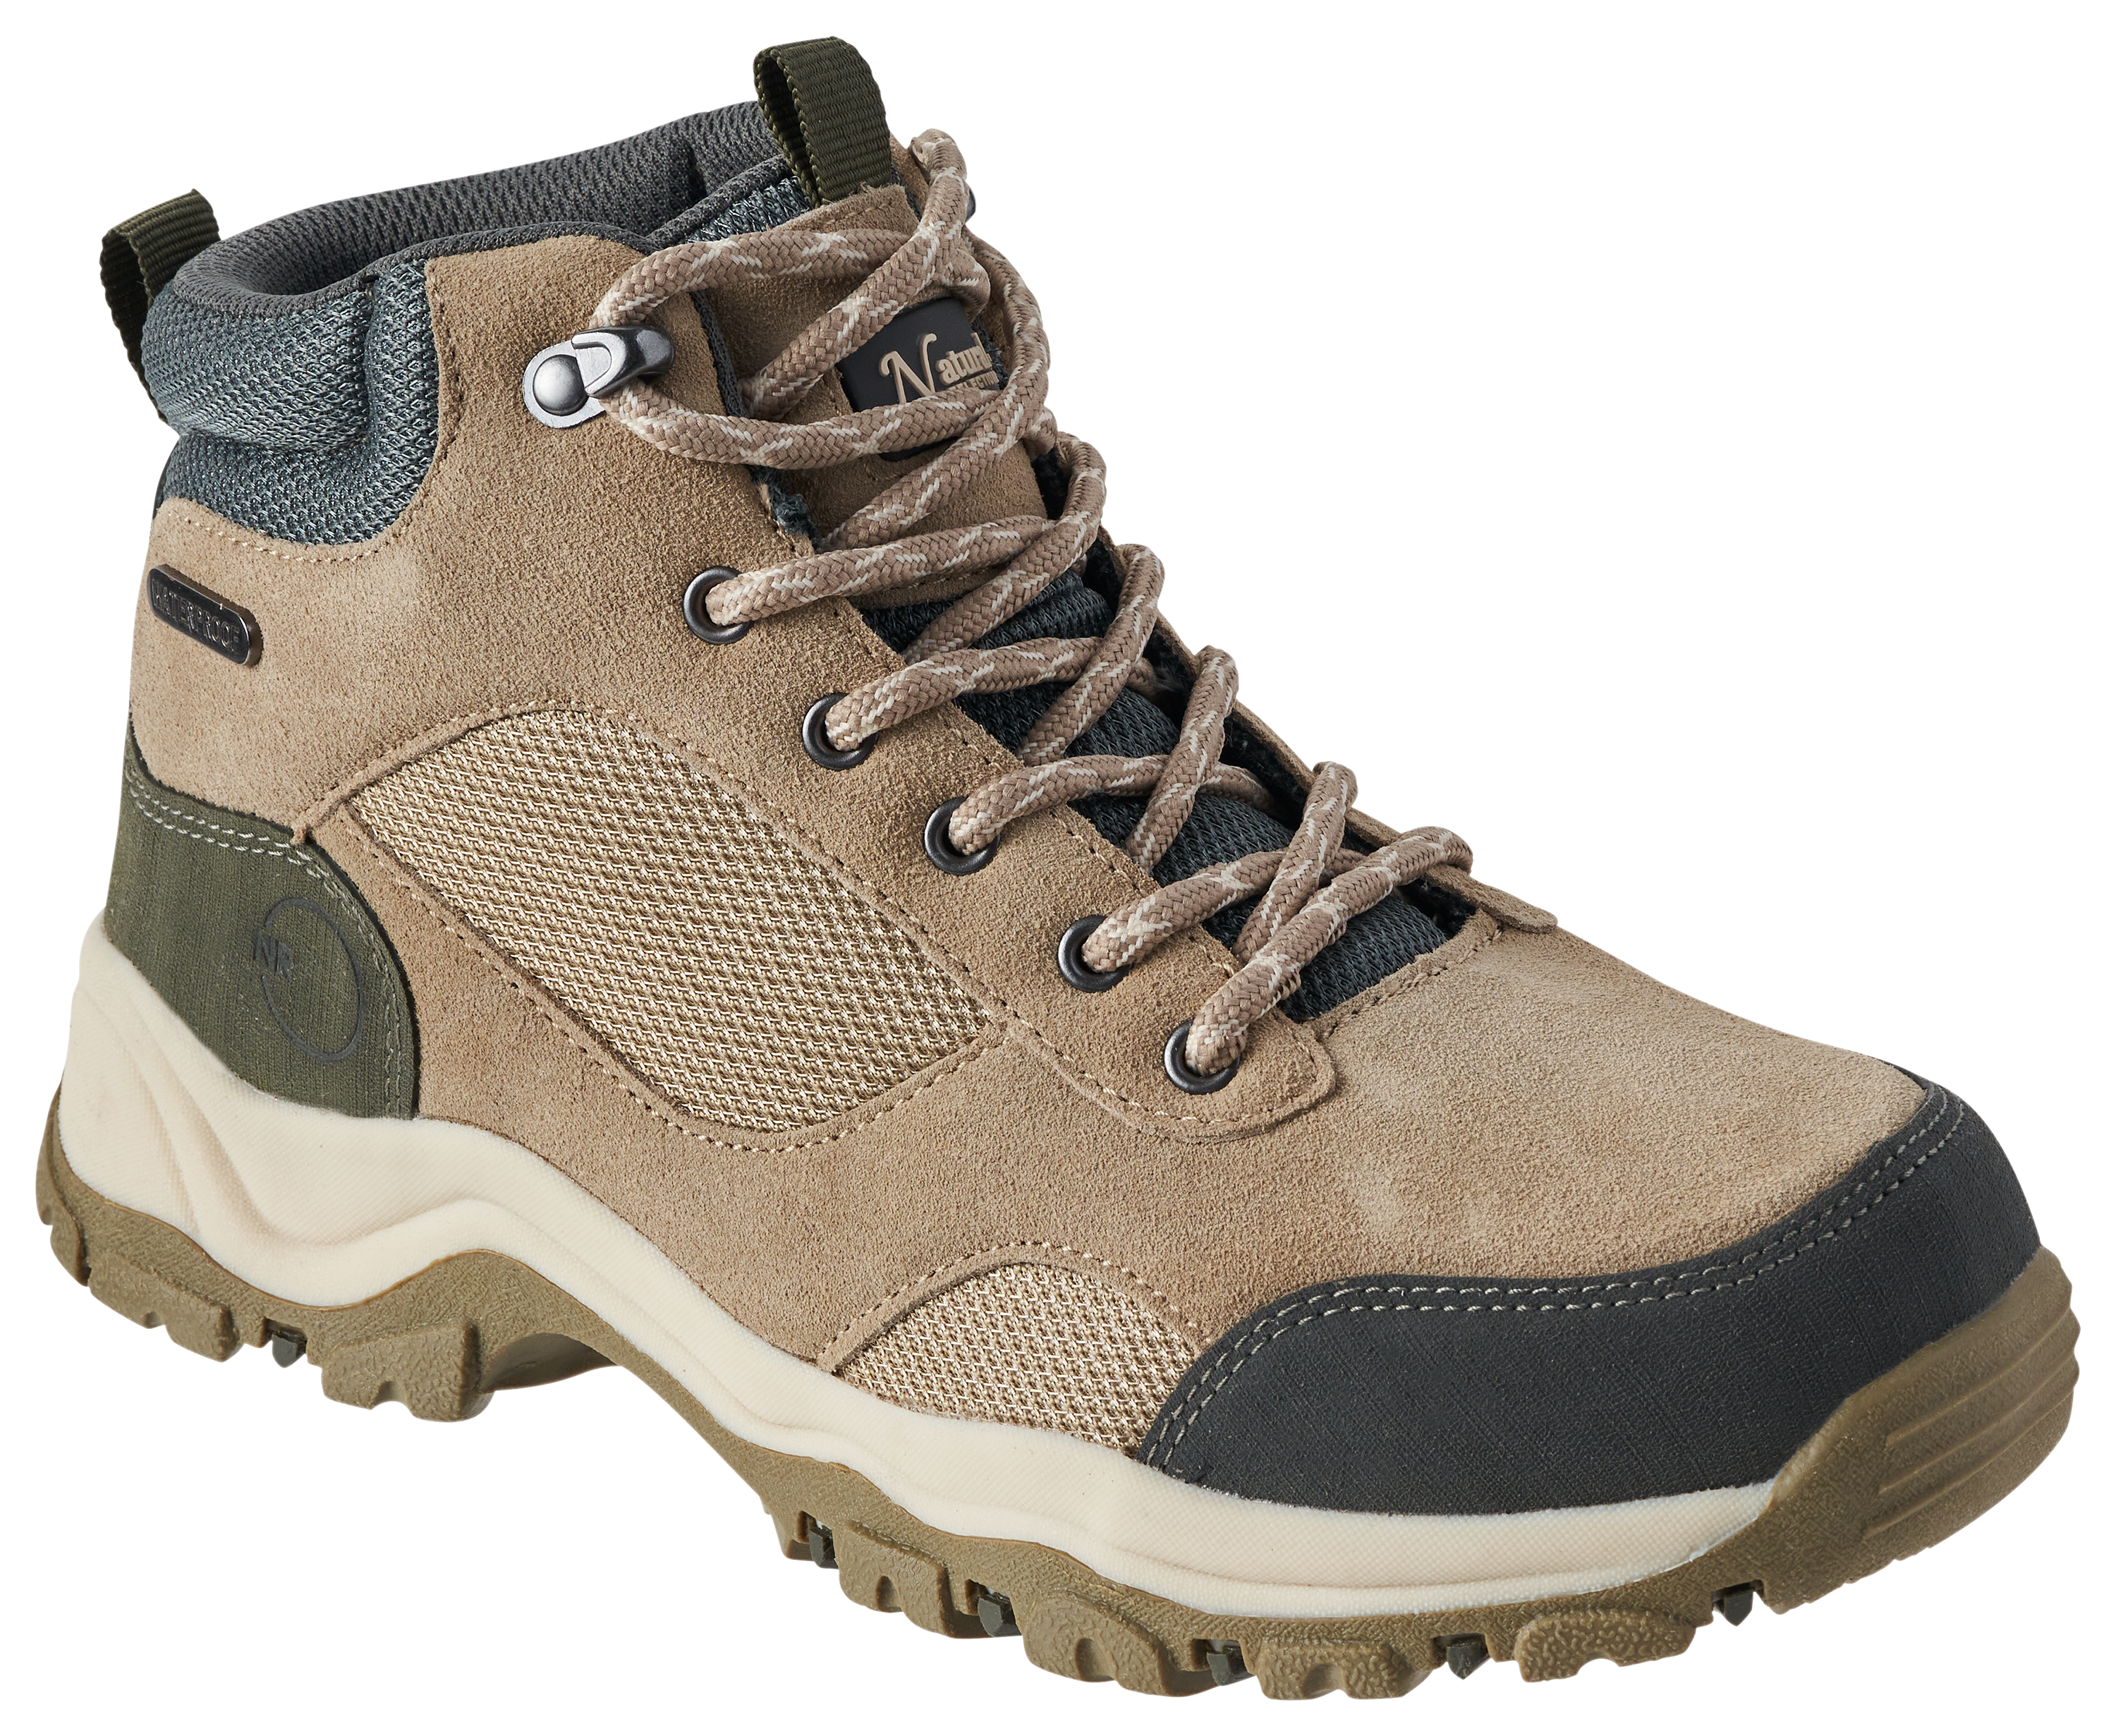 Natural Reflections Skyline II Mid Waterproof Hiking Boots for Ladies - Tan/Charcoal - 6M